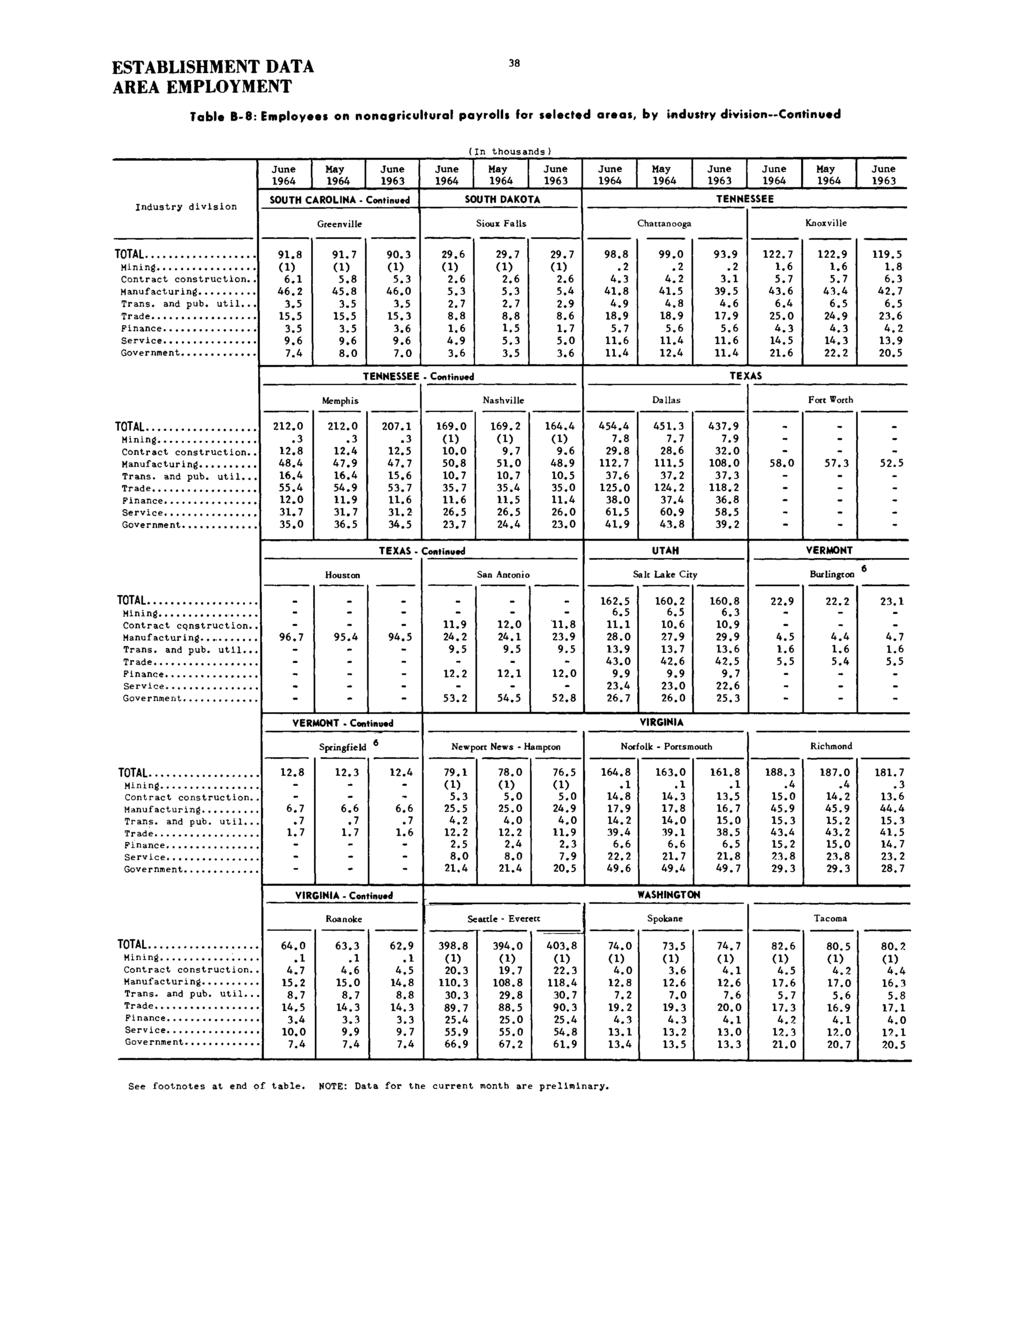 AREA EMPLOYMENT 38 Table B-8: Employees on nonagricultural payrolls for selected areas, by industry division Continued (In thousands) Industry division SOUTH CAROLINA - Continued SOUTH DAKOTA